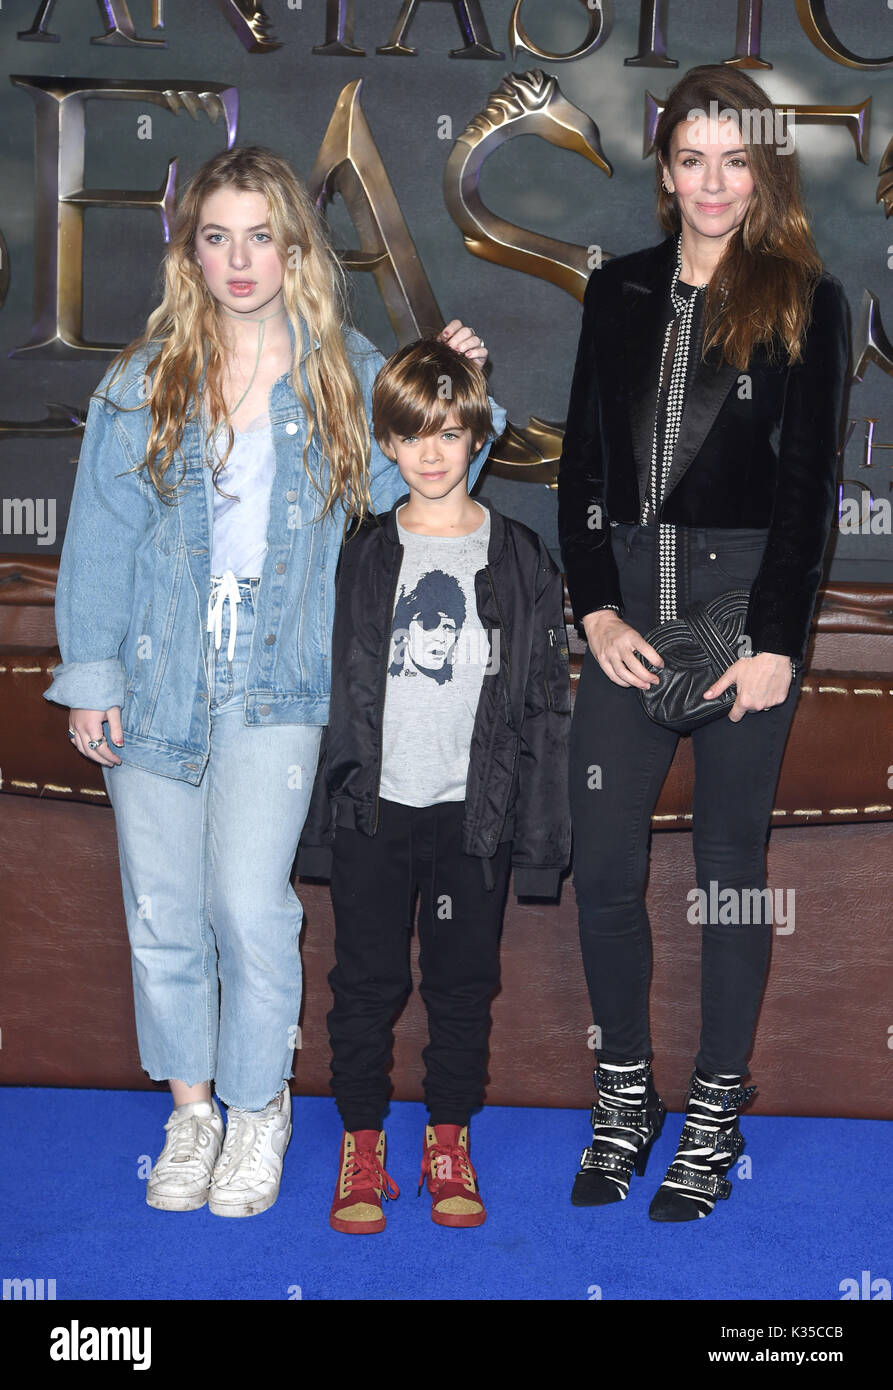 Photo Must Be Credited ©Alpha Press 079965 15/11/2016 Sara MacDonald and Son Donovan and Anais Gallagher European Premiere Of Fantastic Beasts And Where To Find Them Leicester Square London Stock Photo